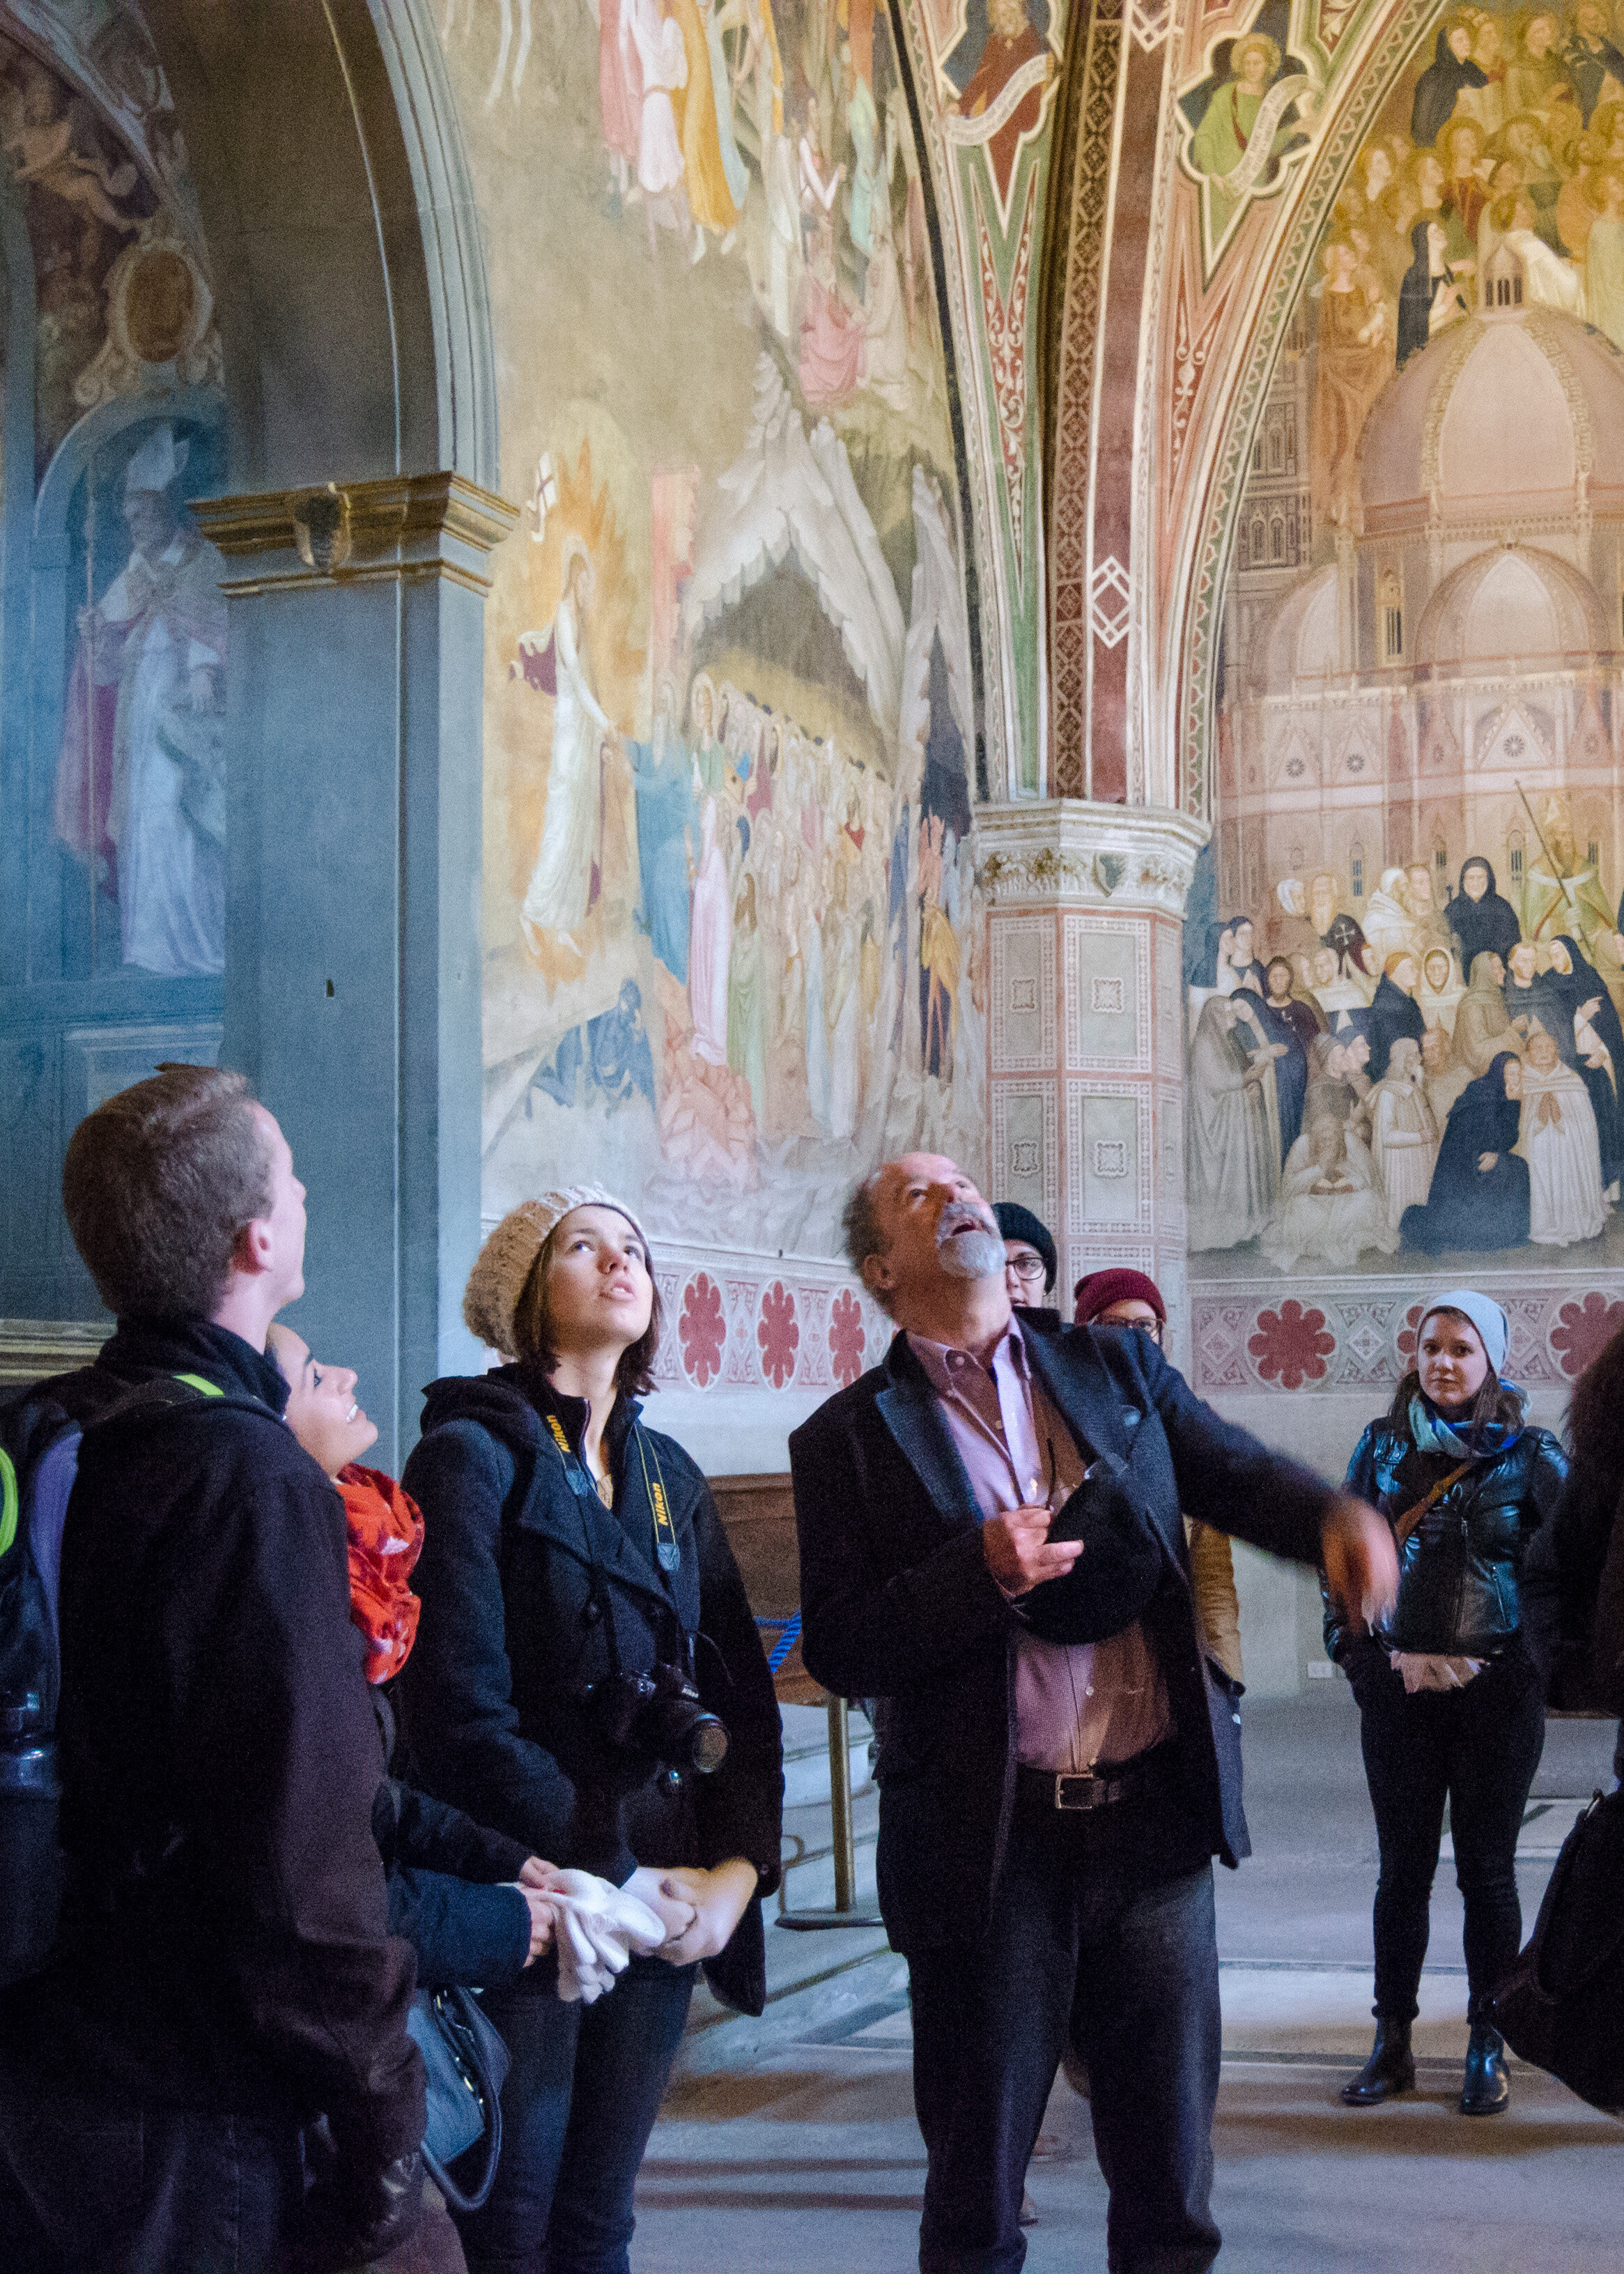  Studying the frescoes in the Chapter House of the Dominican Santa Maria Novella monastery in Florence. 